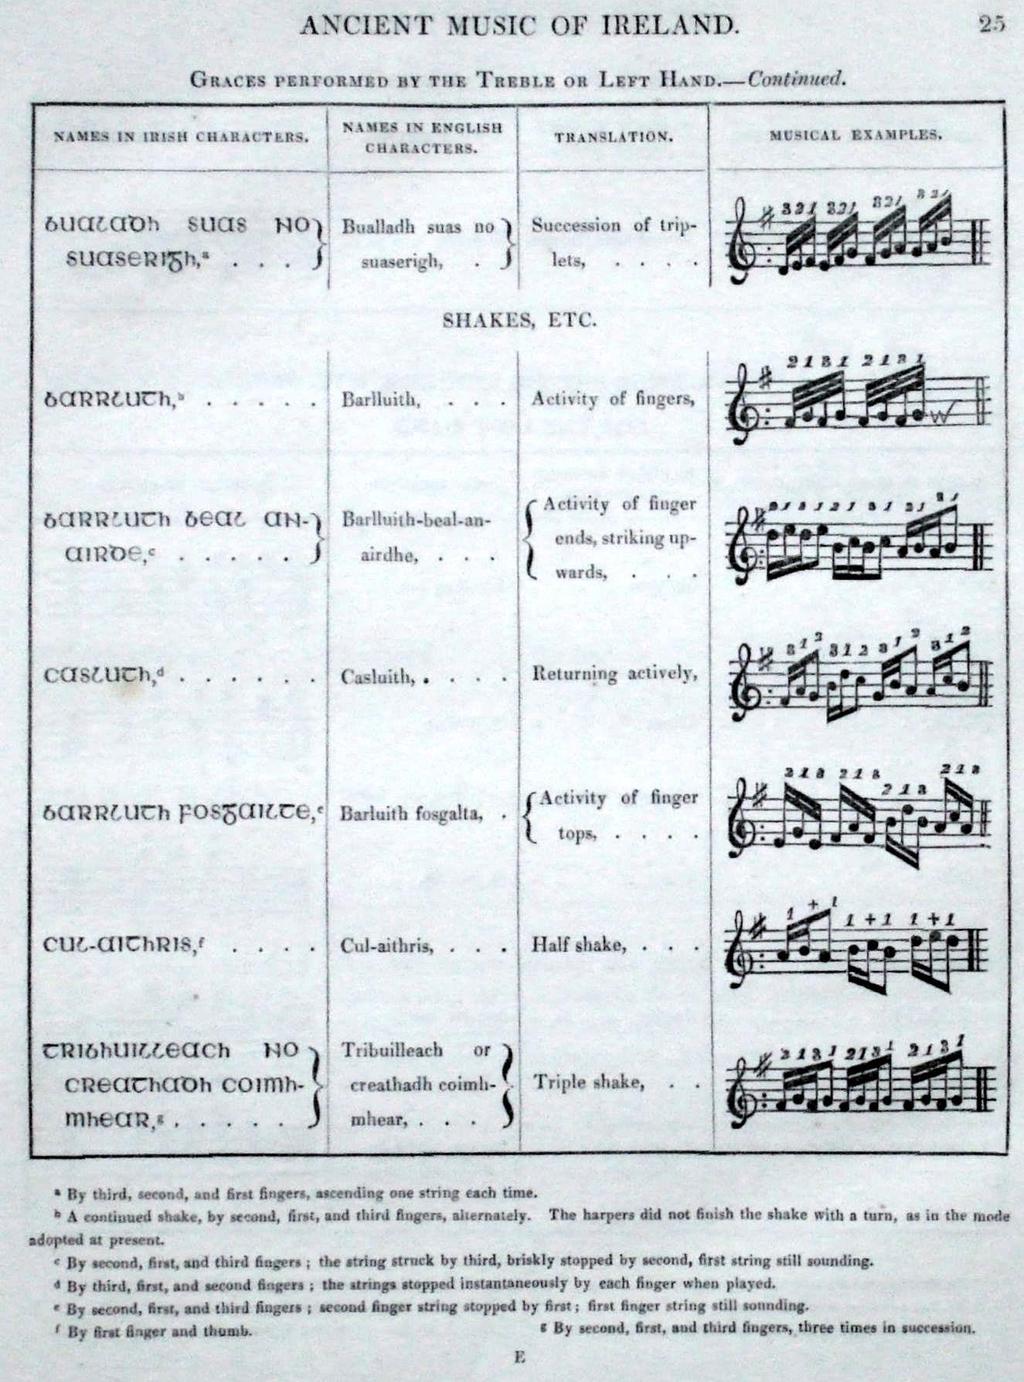 MacDonald s names for a bagpipe movement.